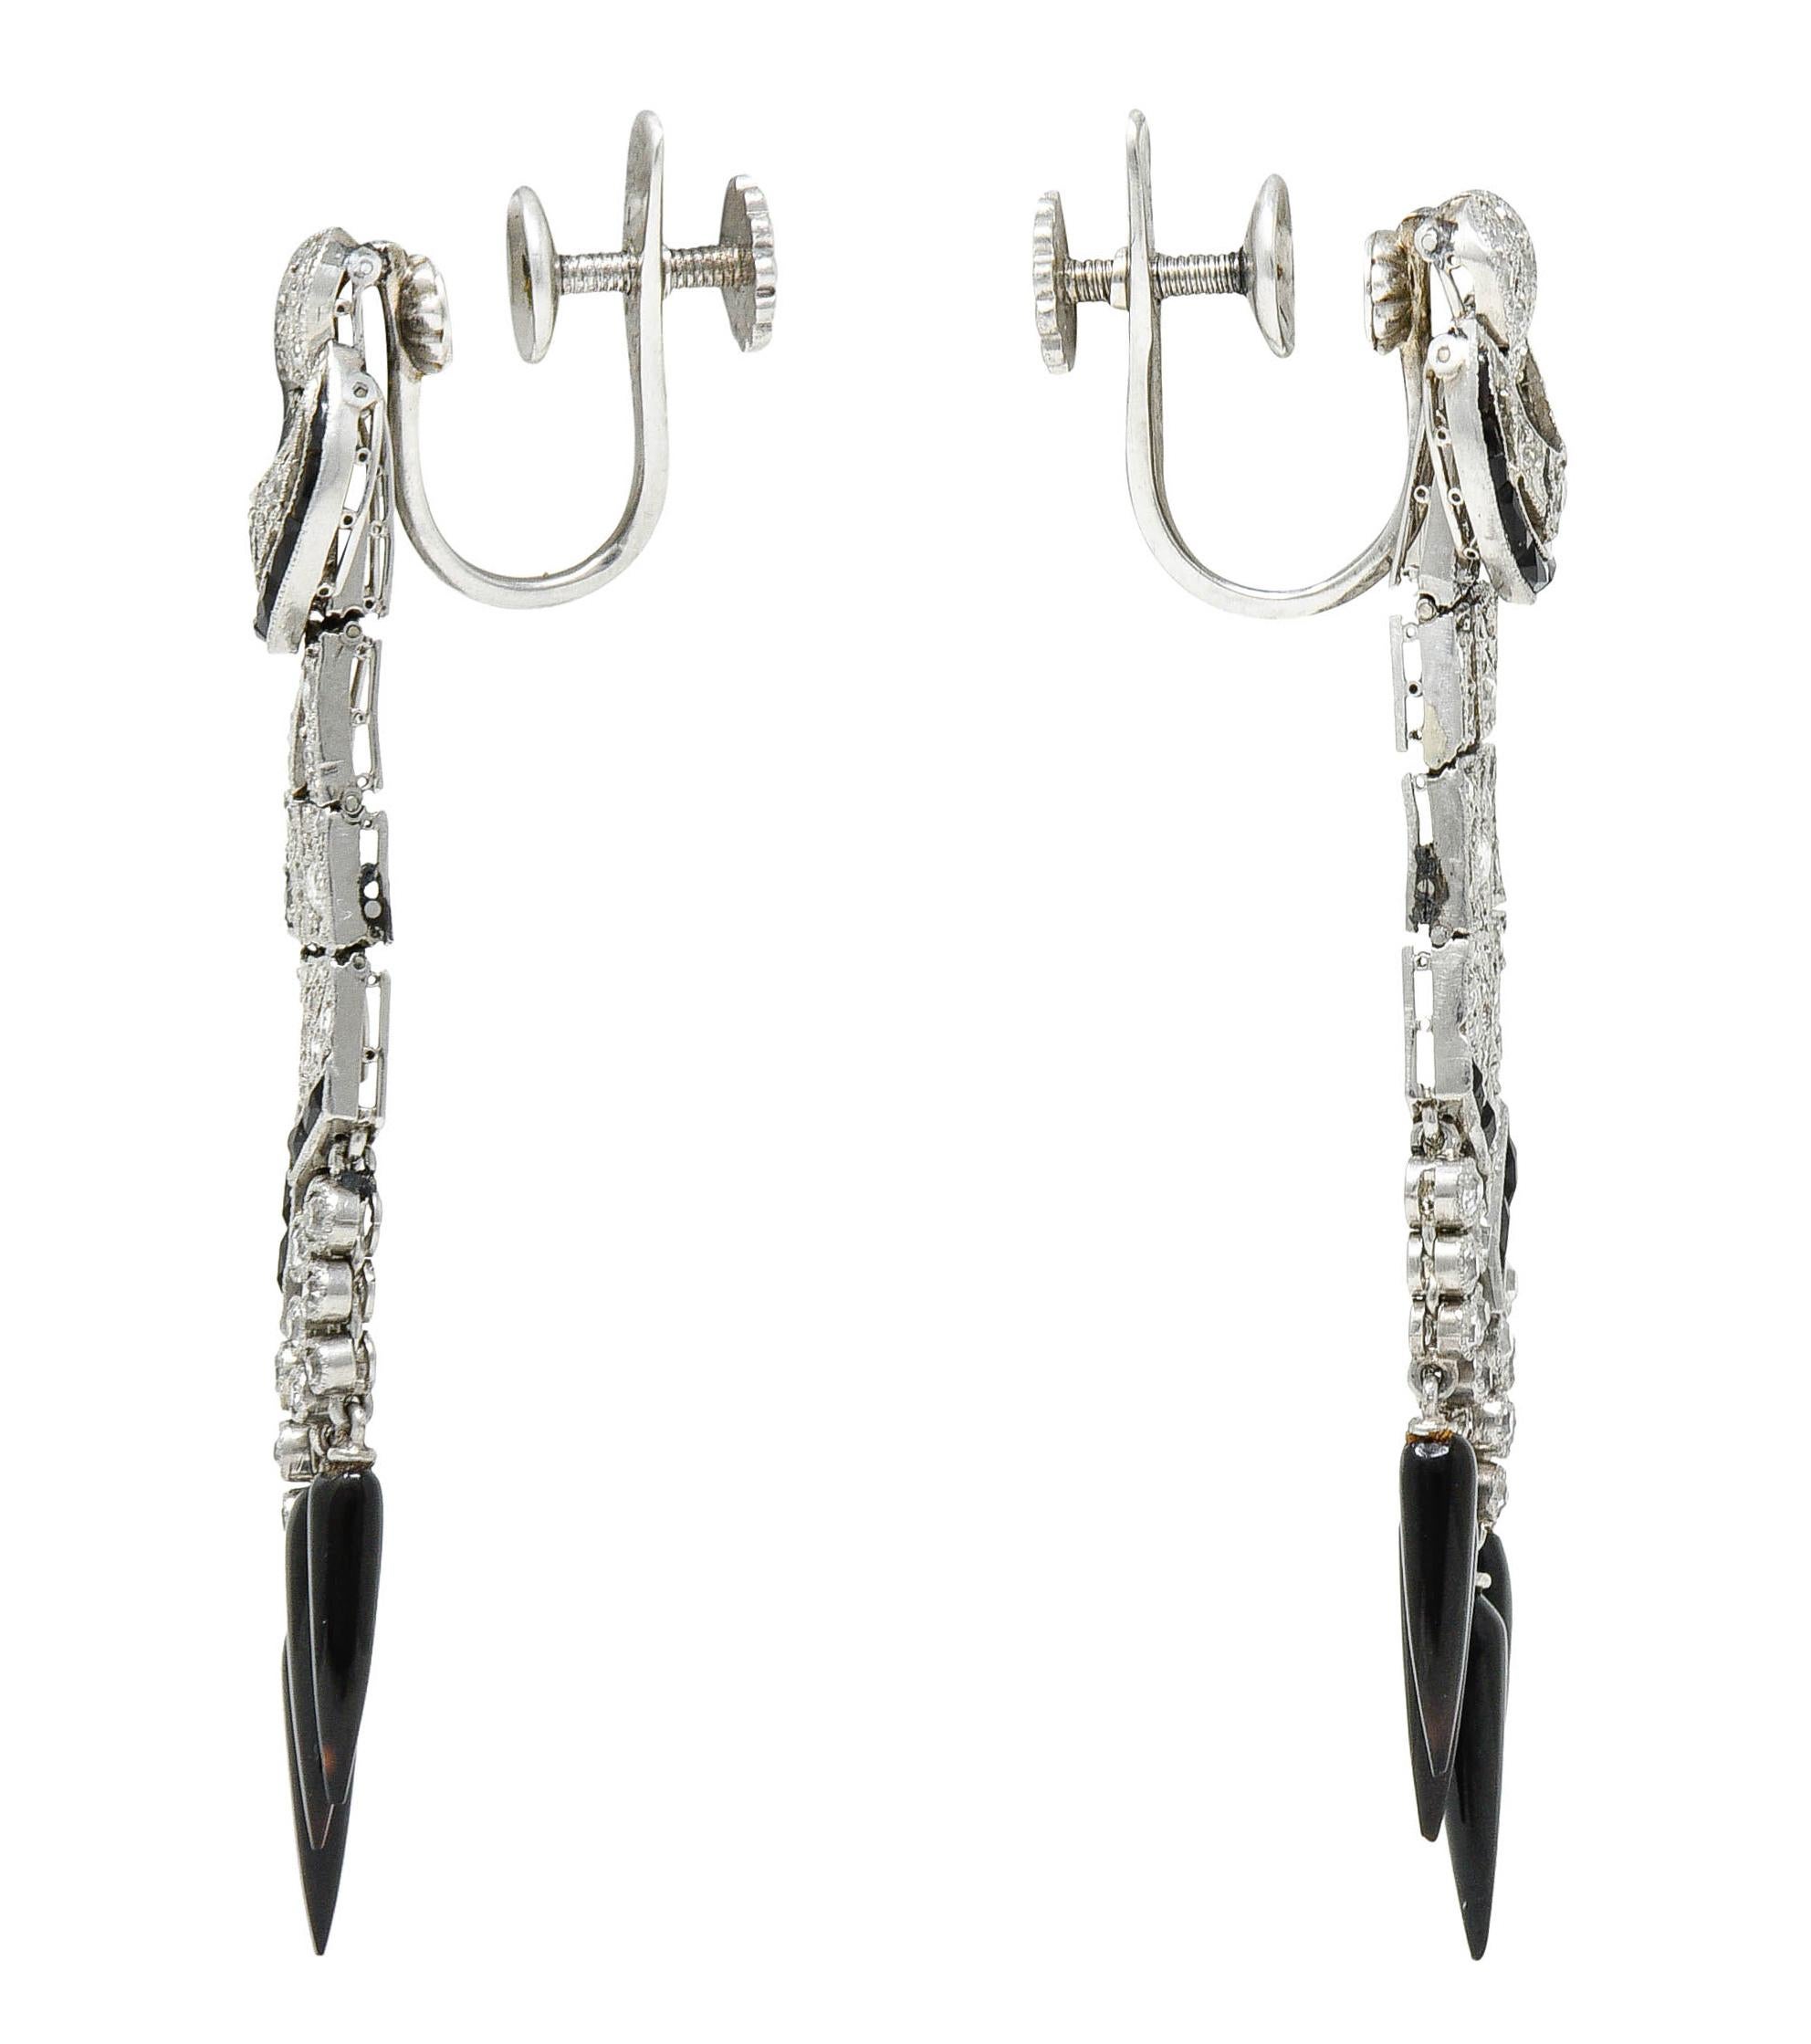 Tassel style earrings are comprised of articulated drops topped with an articulated buckle motif

Accented by calibrè cut onyx and terminating as onyx pointed pampel drops

Set throughout by single, rose, and transitional cut diamonds

Weighing in